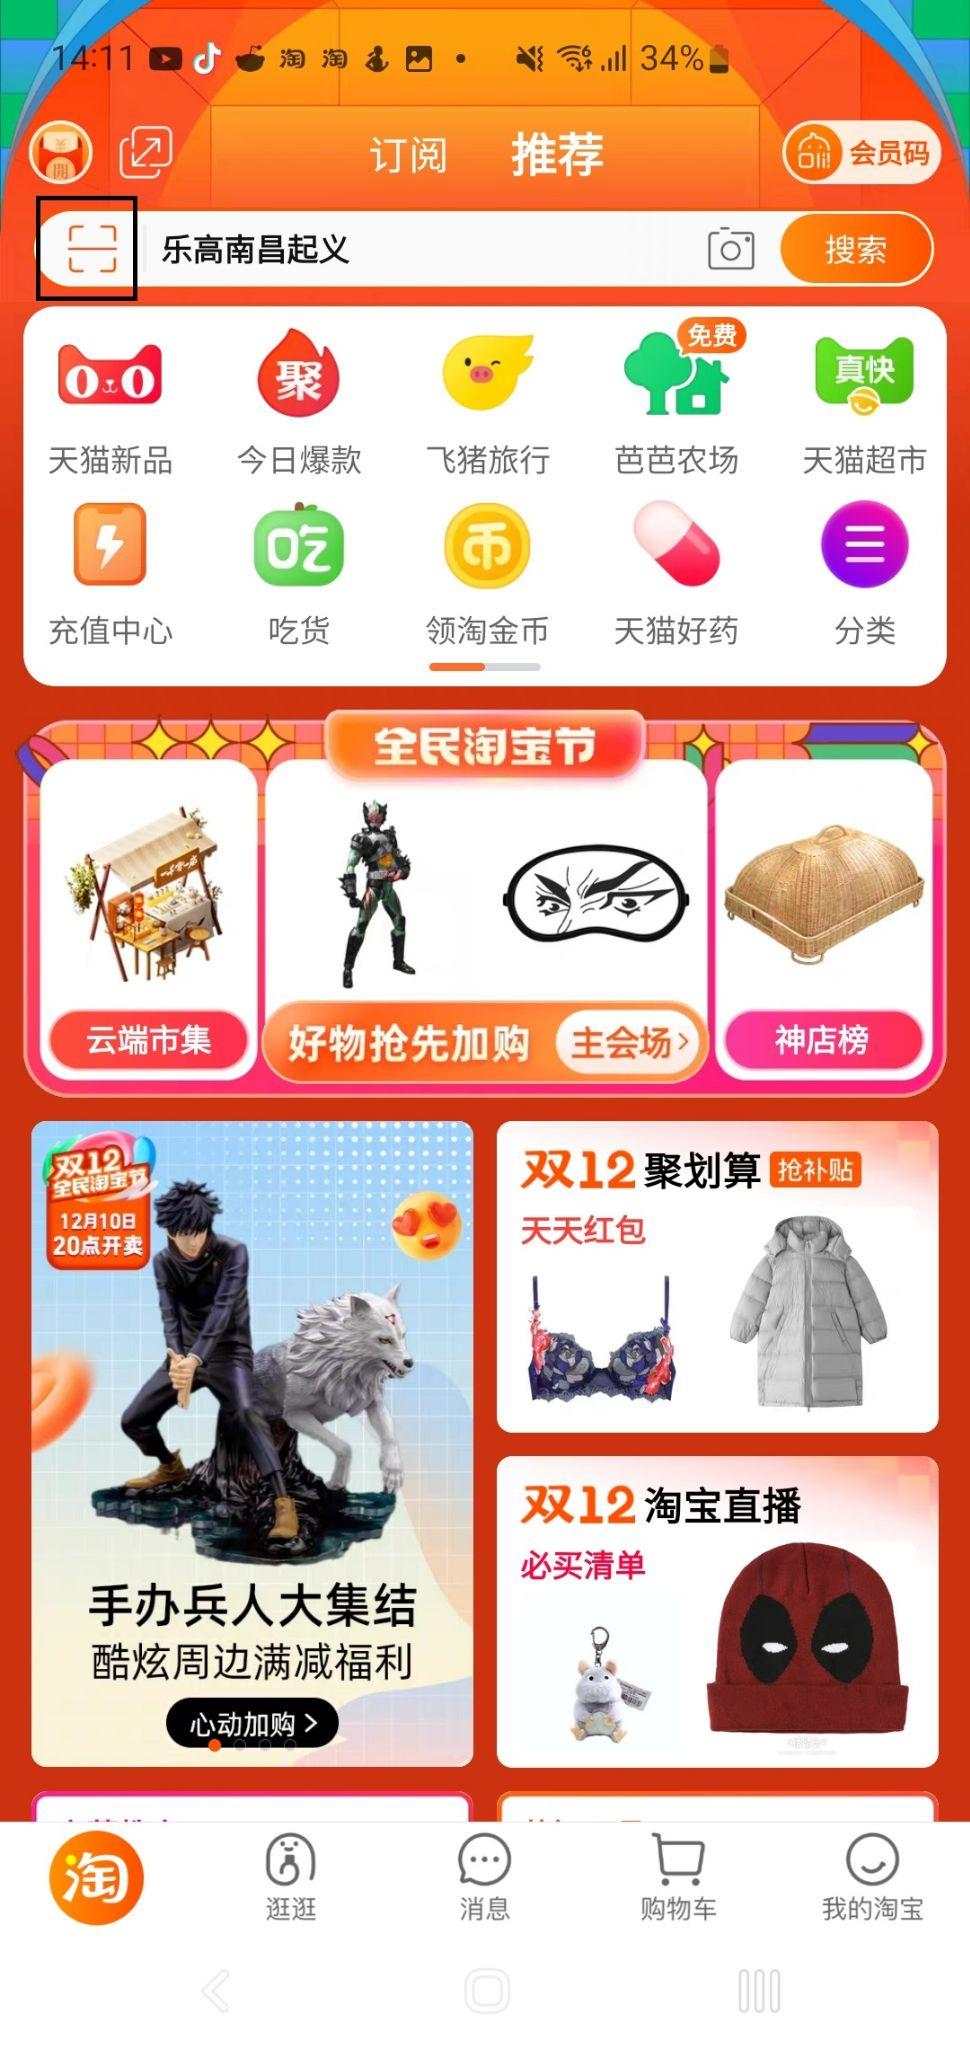 Play mini-games to collect Taobao coins